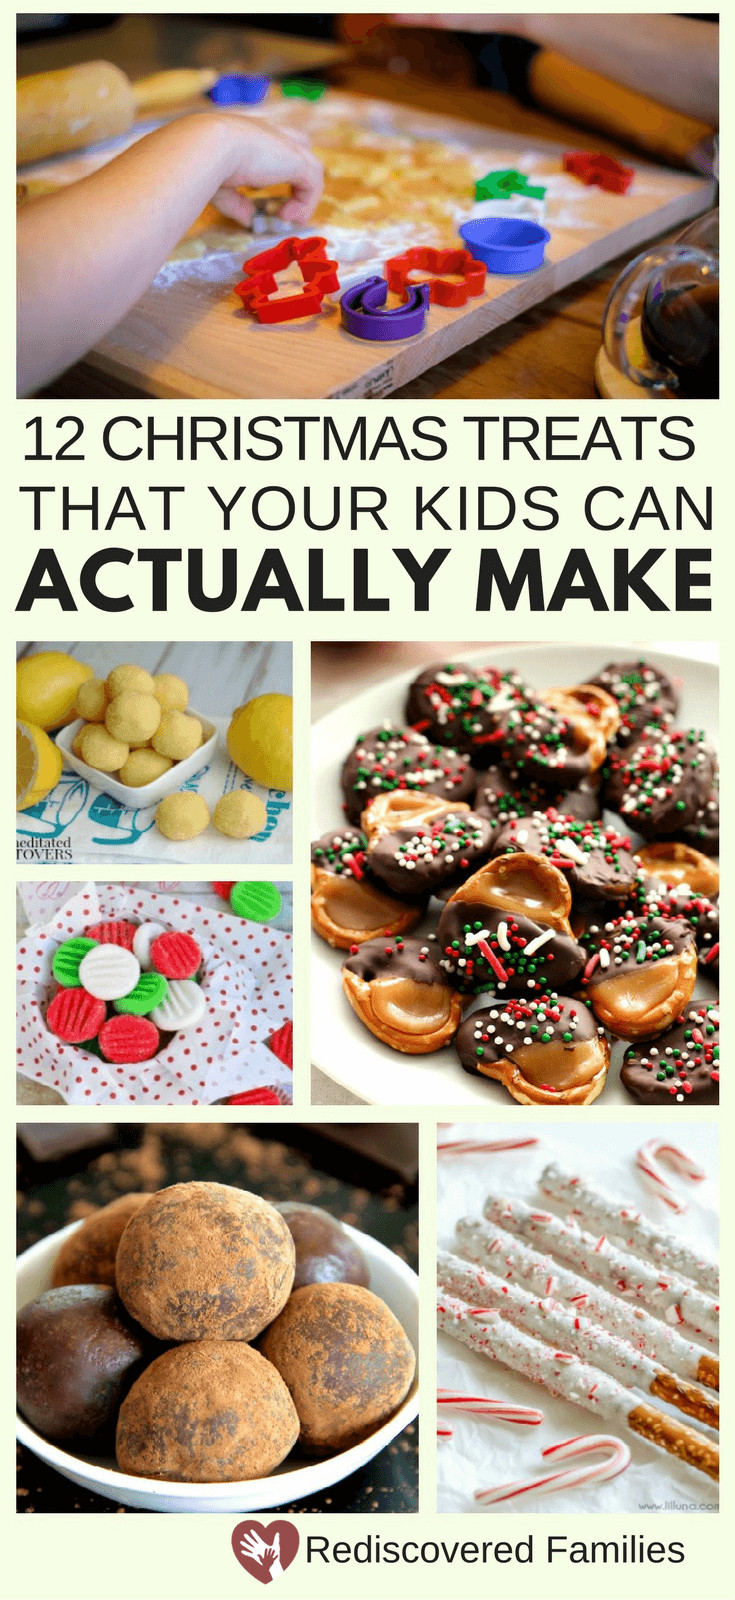 Easy Desserts Kids Can Make
 12 Easy Christmas Treats That Your Kids Can Actually Make